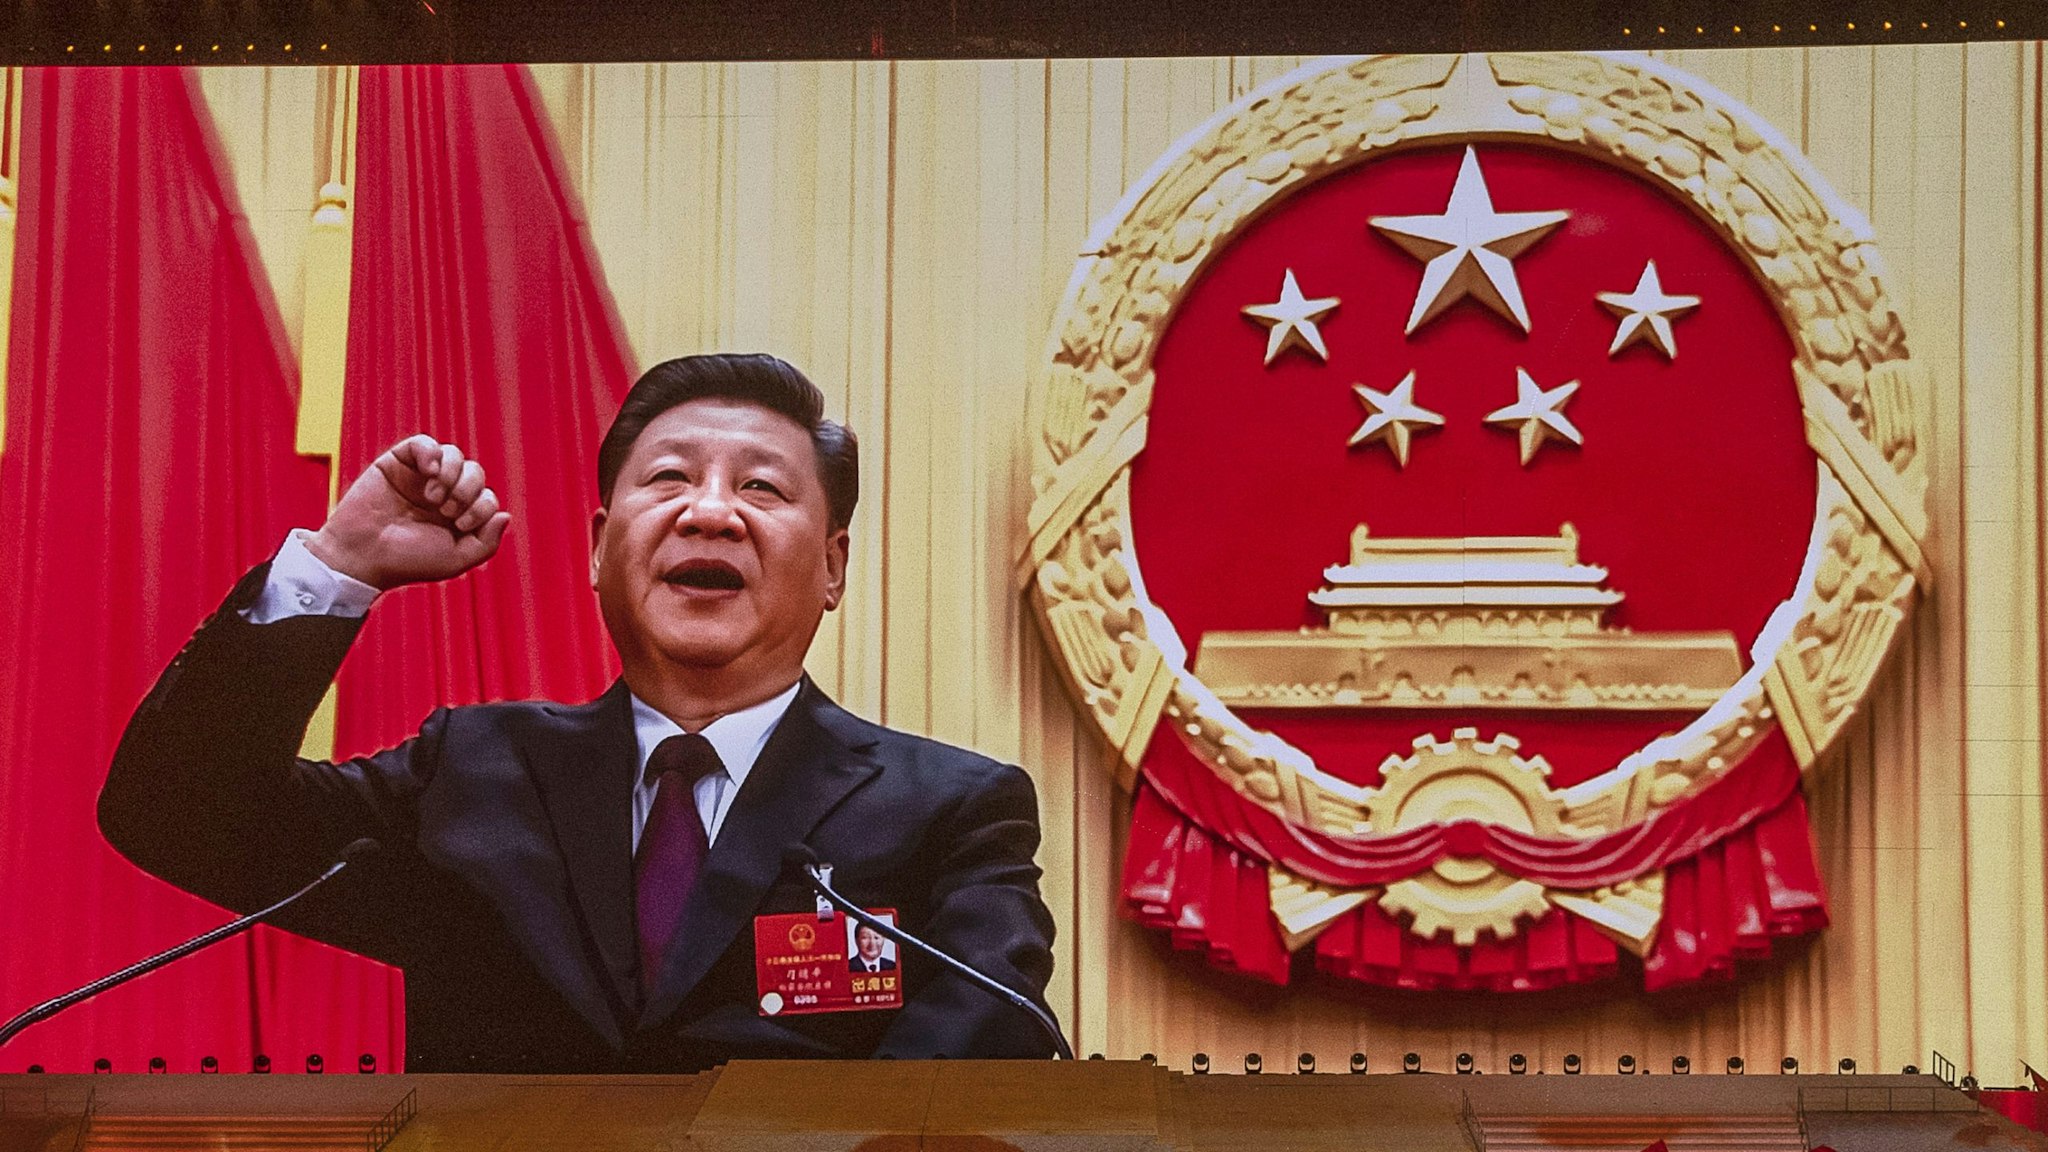 BEIJING, CHINA - JUNE 28: Chinese President and Chairman of the Communist Party Xi Jinping appears on a large screen as performers dance during a mass gala marking the 100th anniversary of the Communist Party on June 28, 2021 at the Olympic Bird's Nest stadium in Beijing, China. China will officially mark the100th anniversary of the founding of the Communist Party on July 1st.